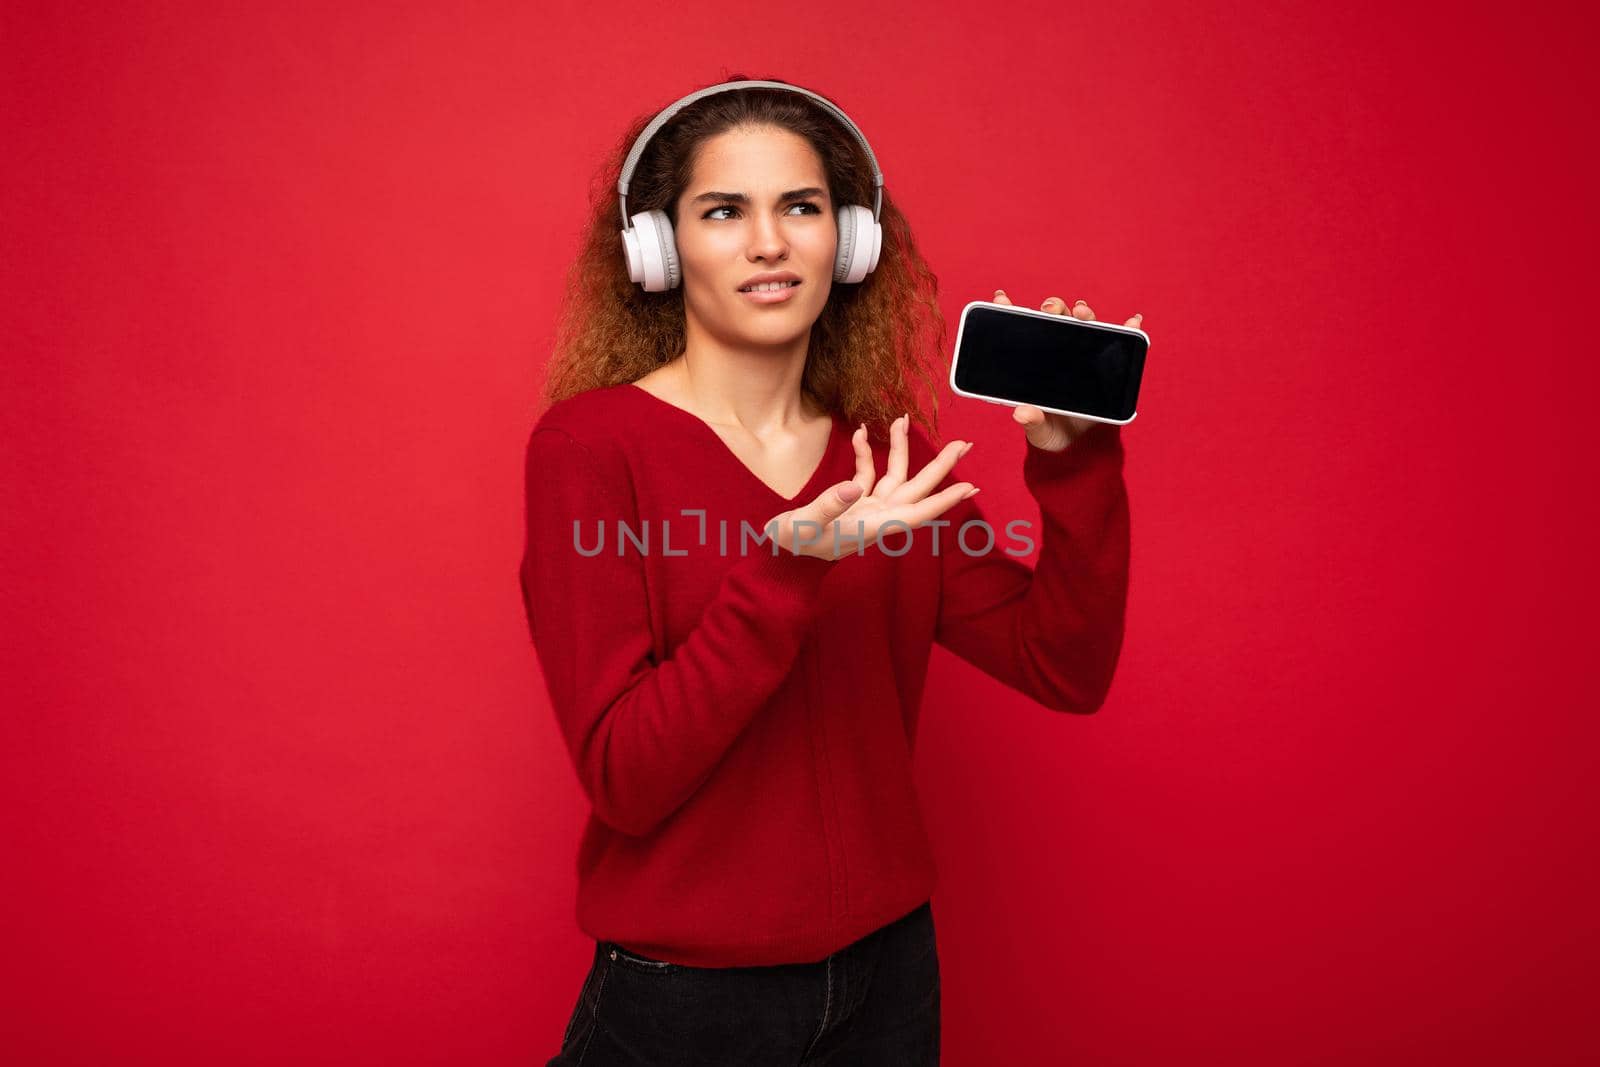 Attractive dissatisfied young woman wearing stylish casual outfit isolated on colourful background wall holding and showing mobile phone with empty screen for cutout wearing white bluetooth headphones.